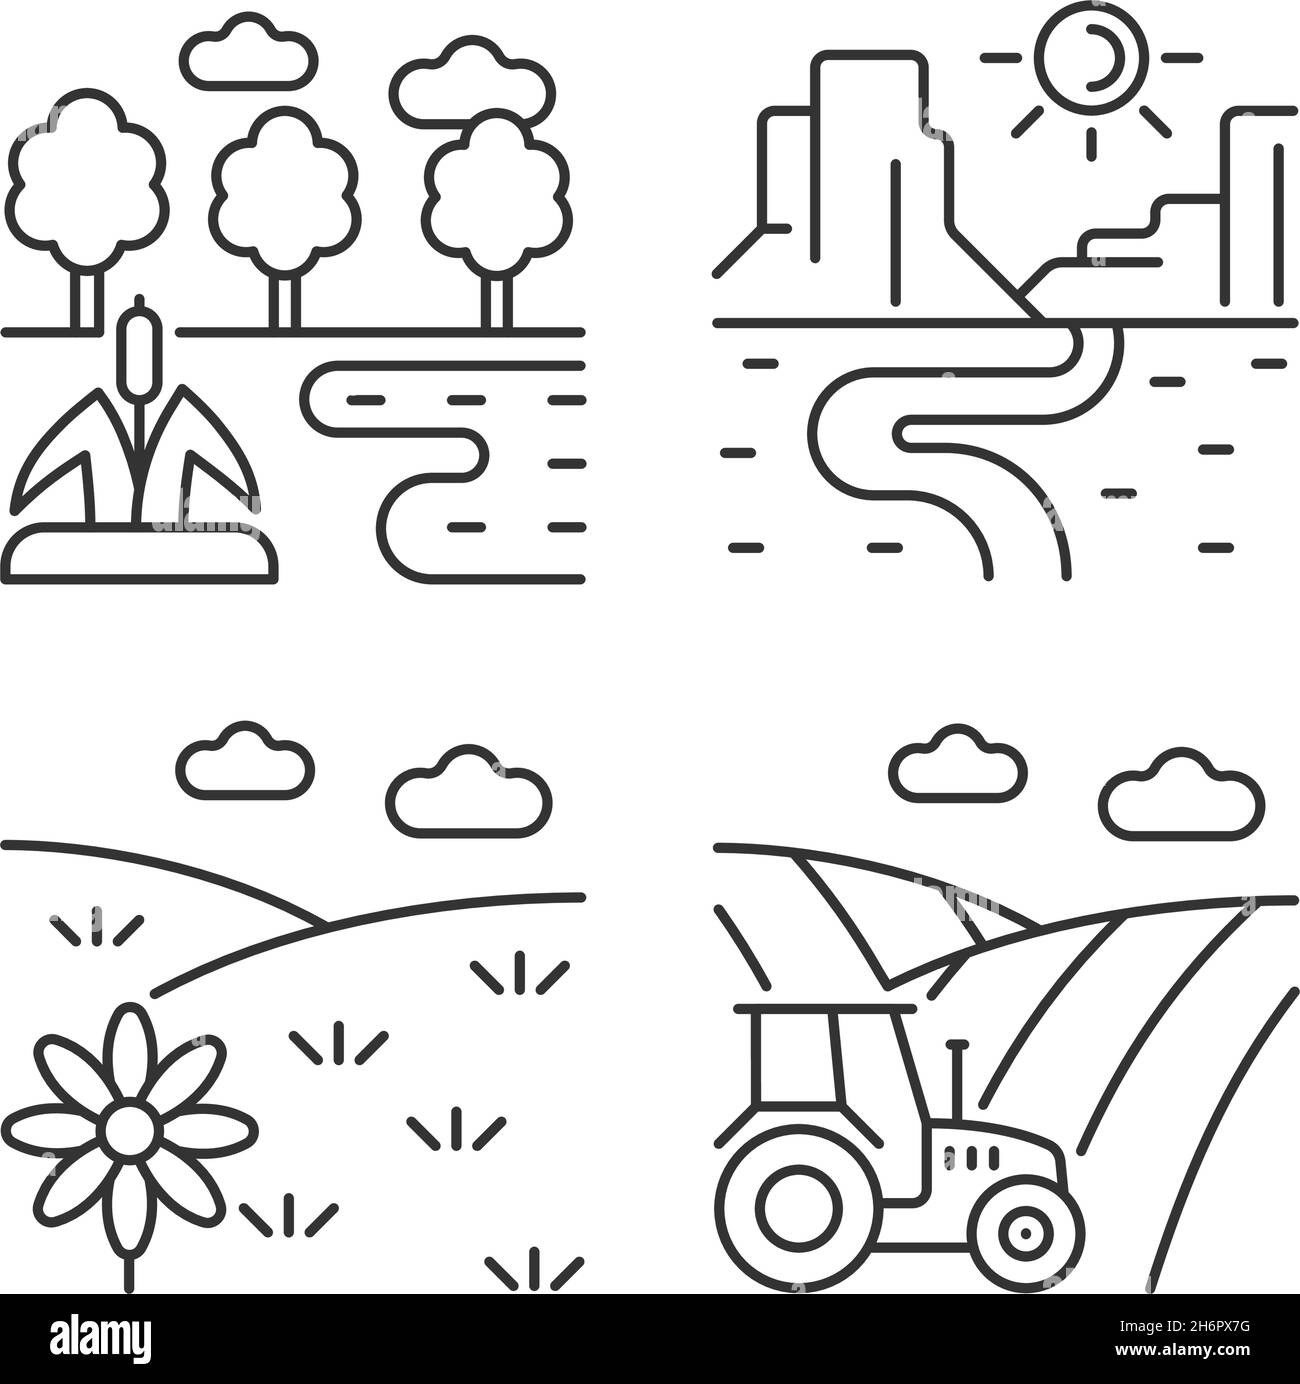 Diverse land types linear icons set Stock Vector